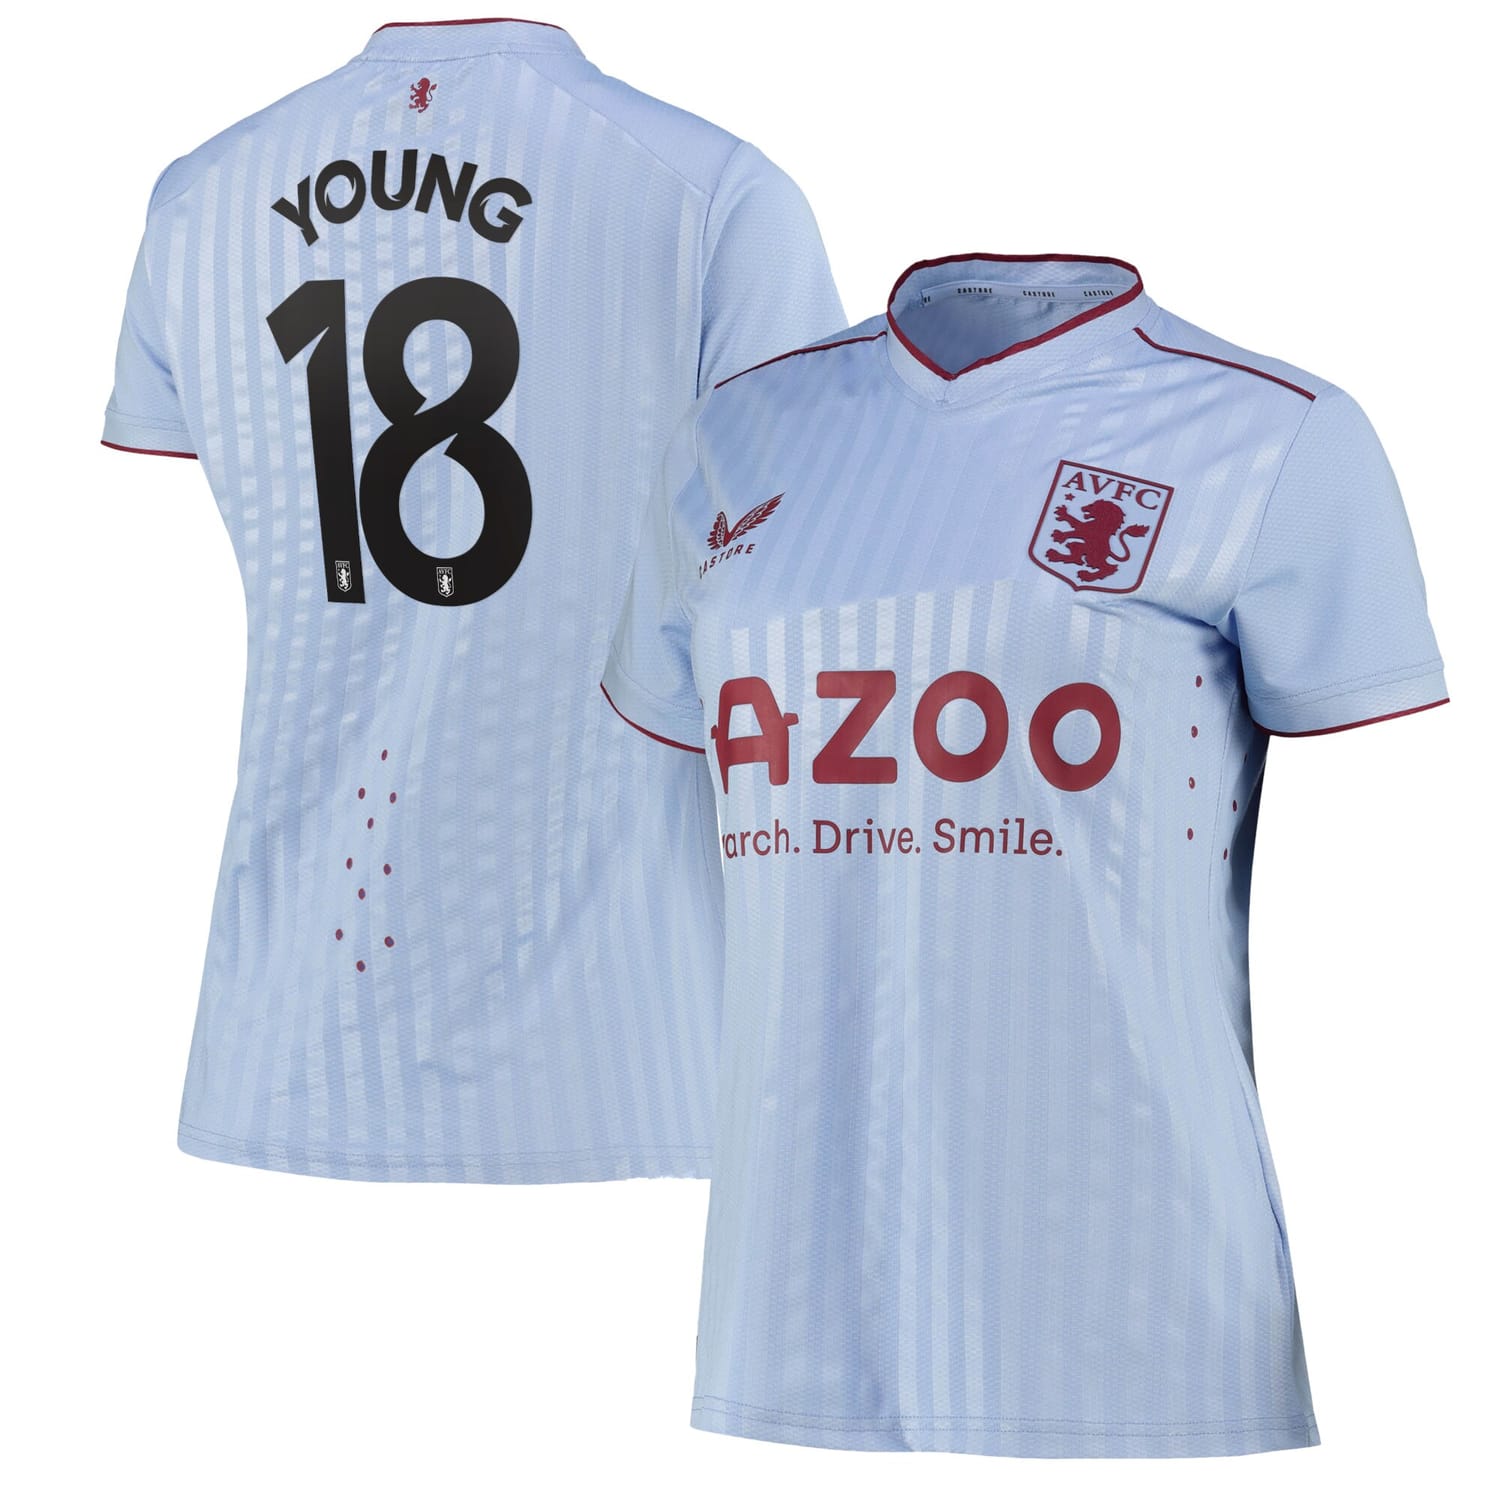 Premier League Aston Villa Away Cup Pro Jersey Shirt 2022-23 player Ashley Young 18 printing for Women